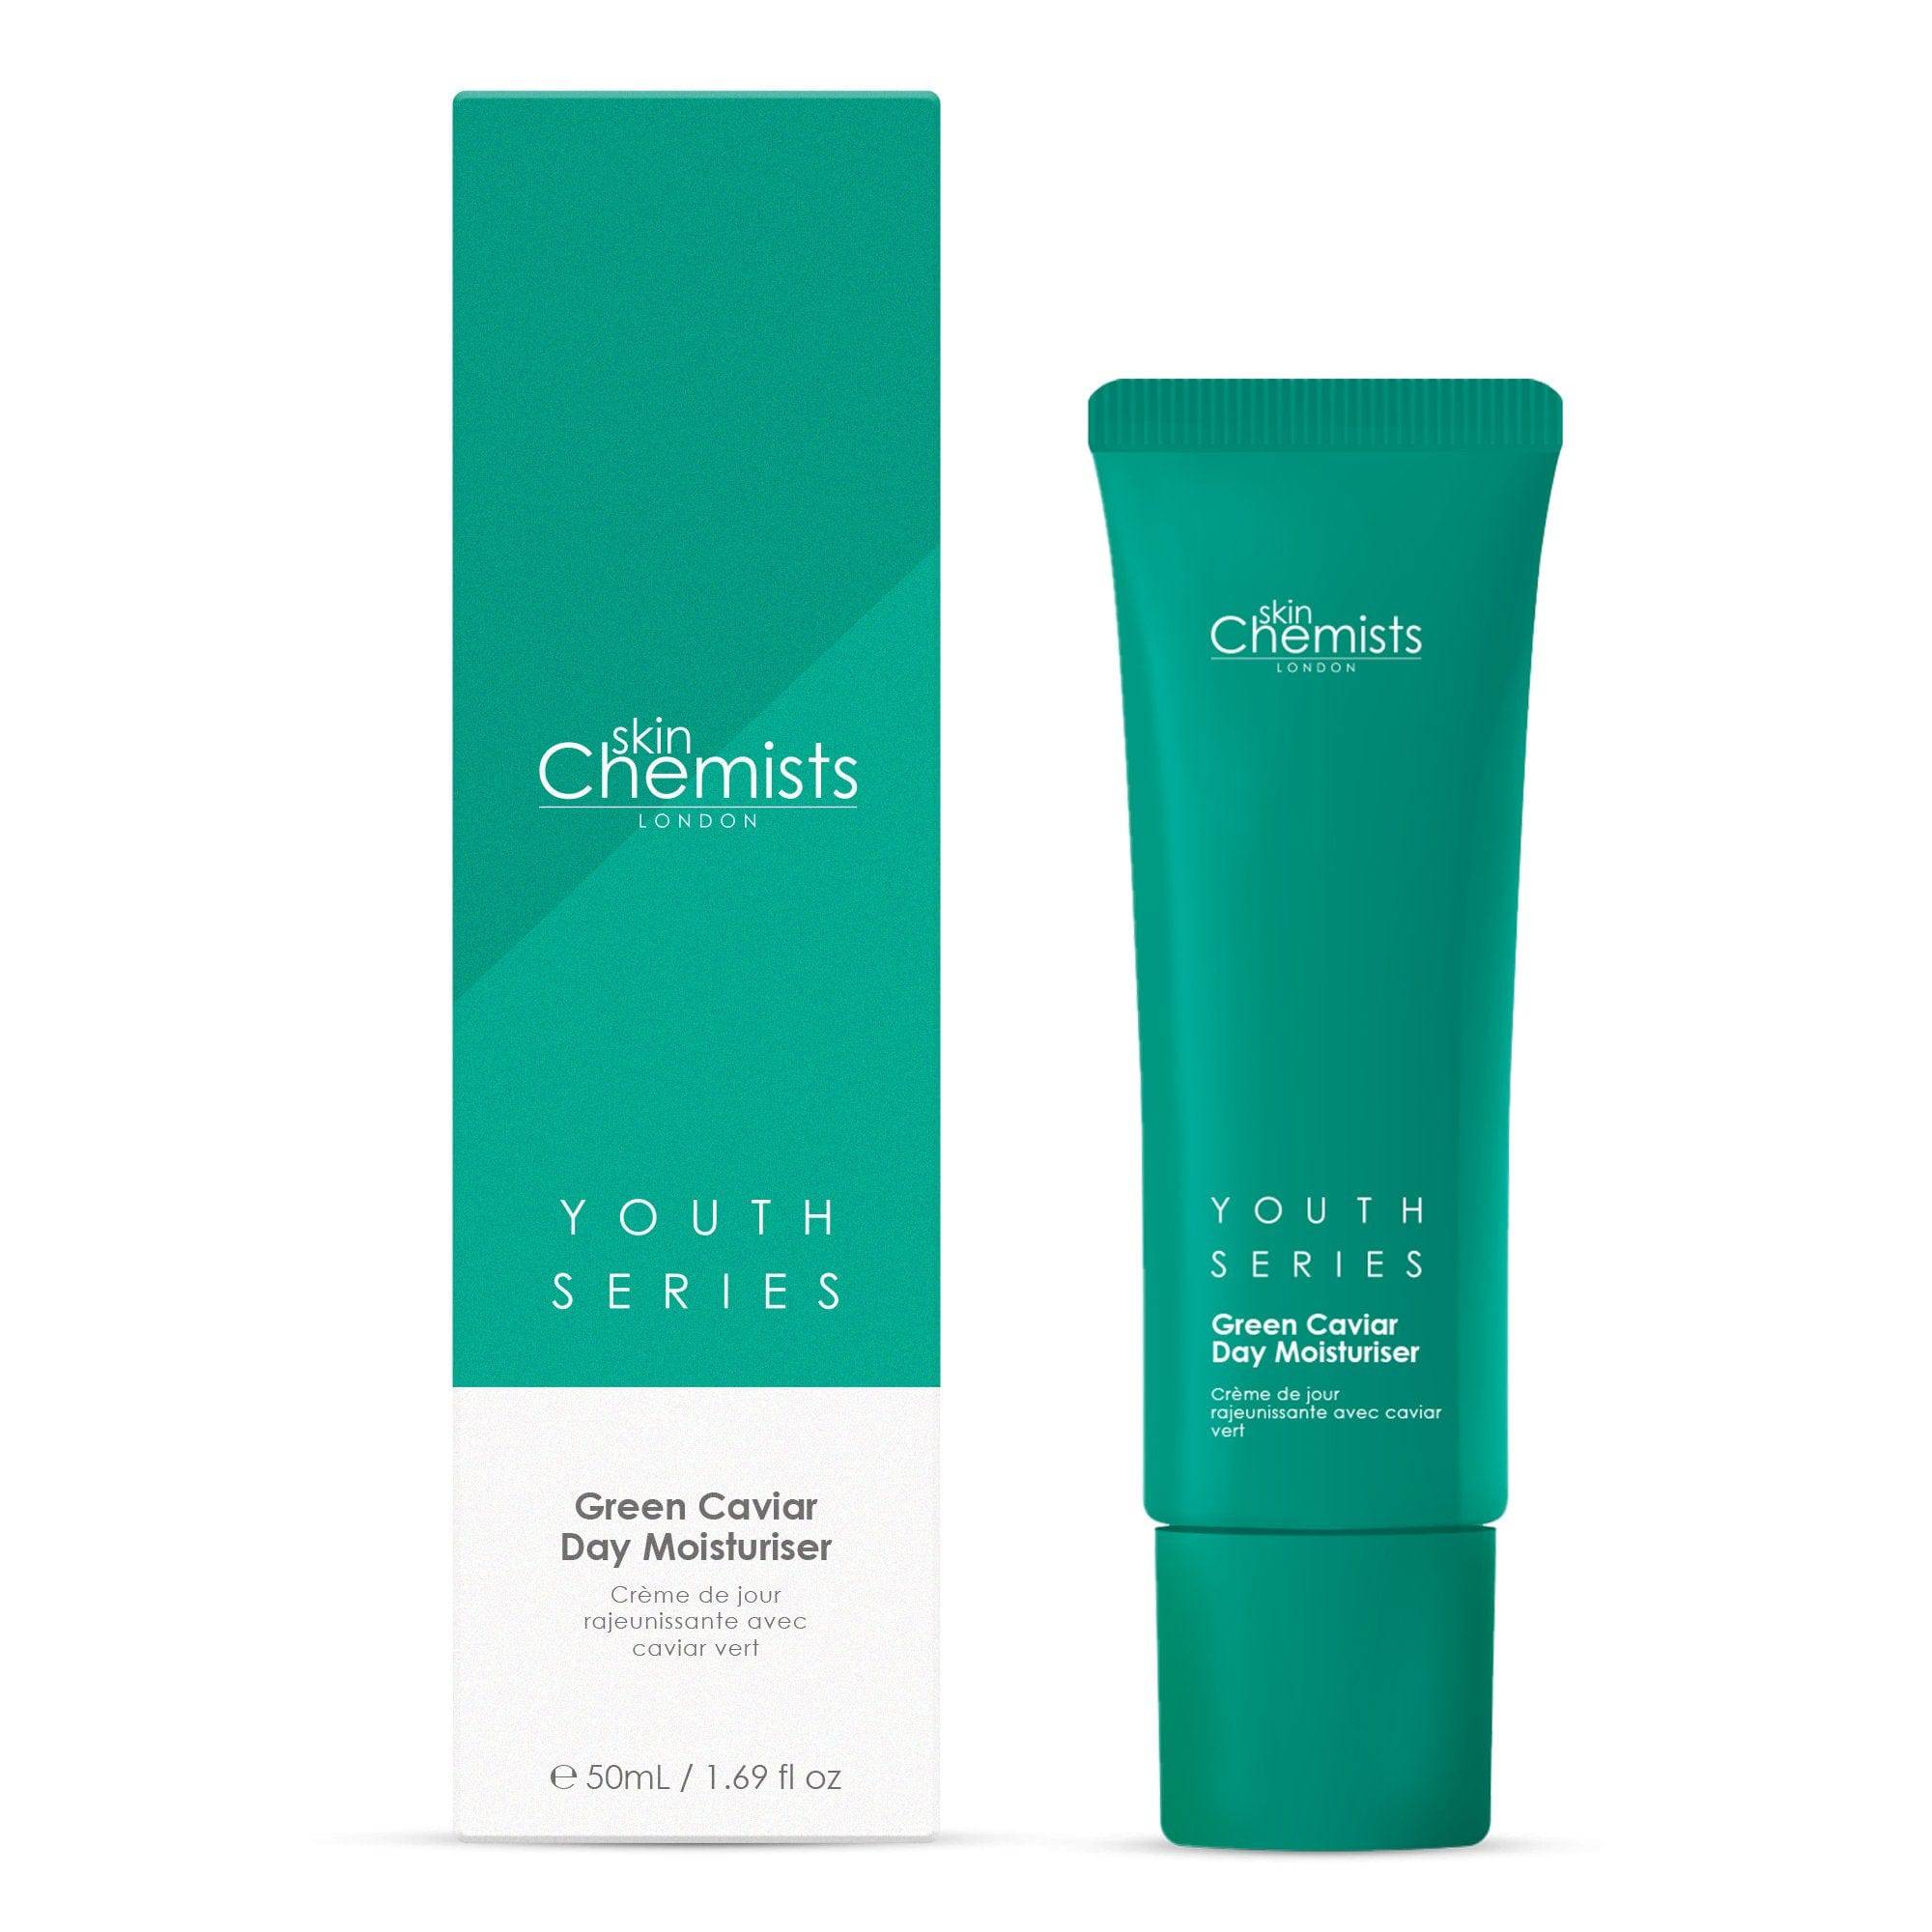 skinChemists Youth Series Green Caviar Hydrating Gift Set